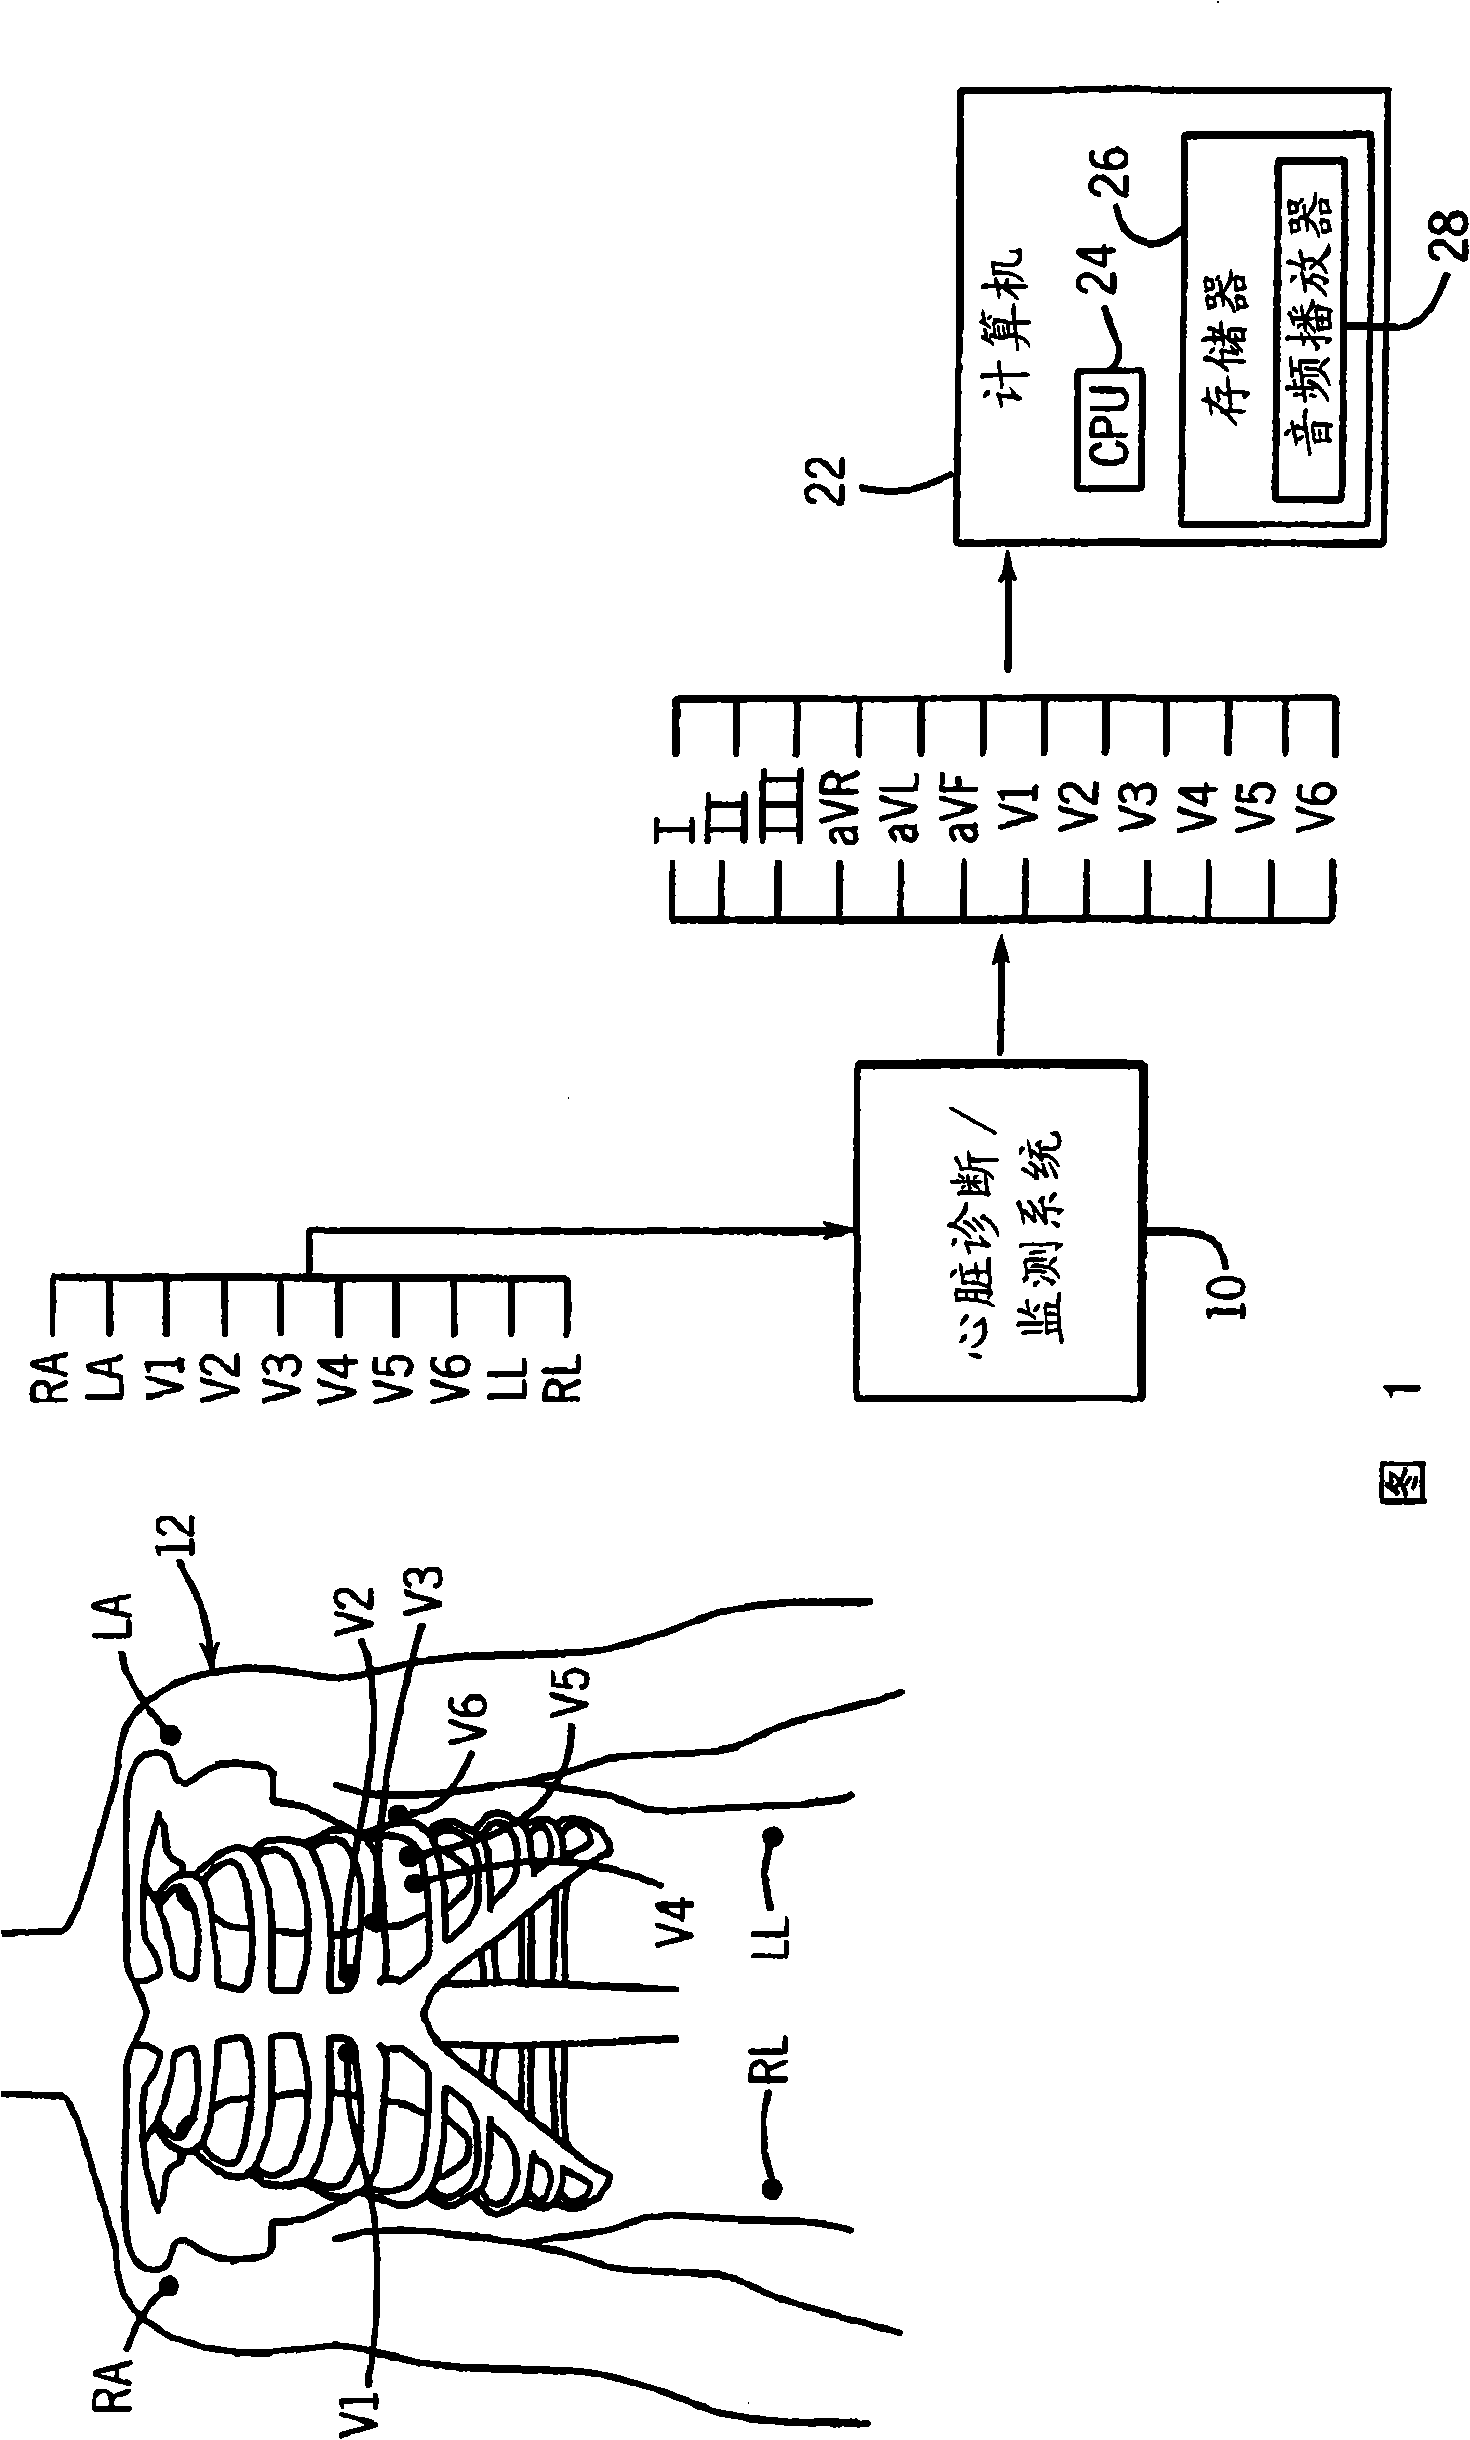 Method and system for patient evaluation